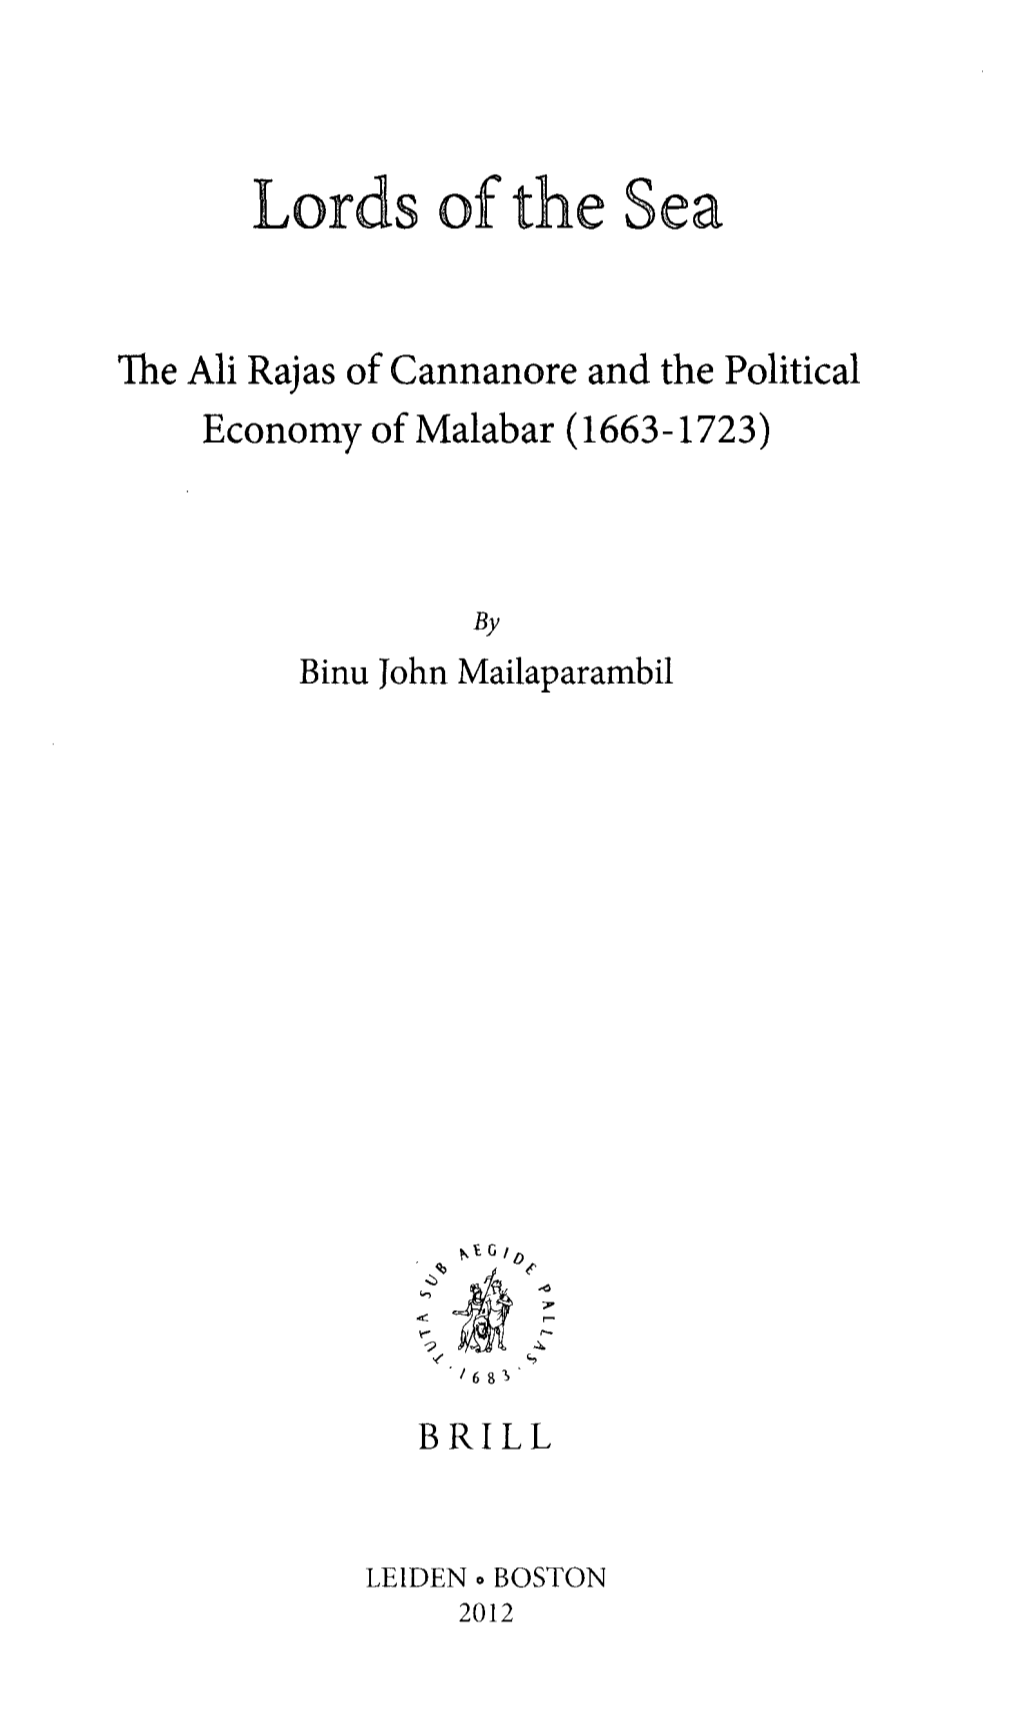 The Ali Rajas of Cannanore and the Political Economy of Malabar (1663-1723)